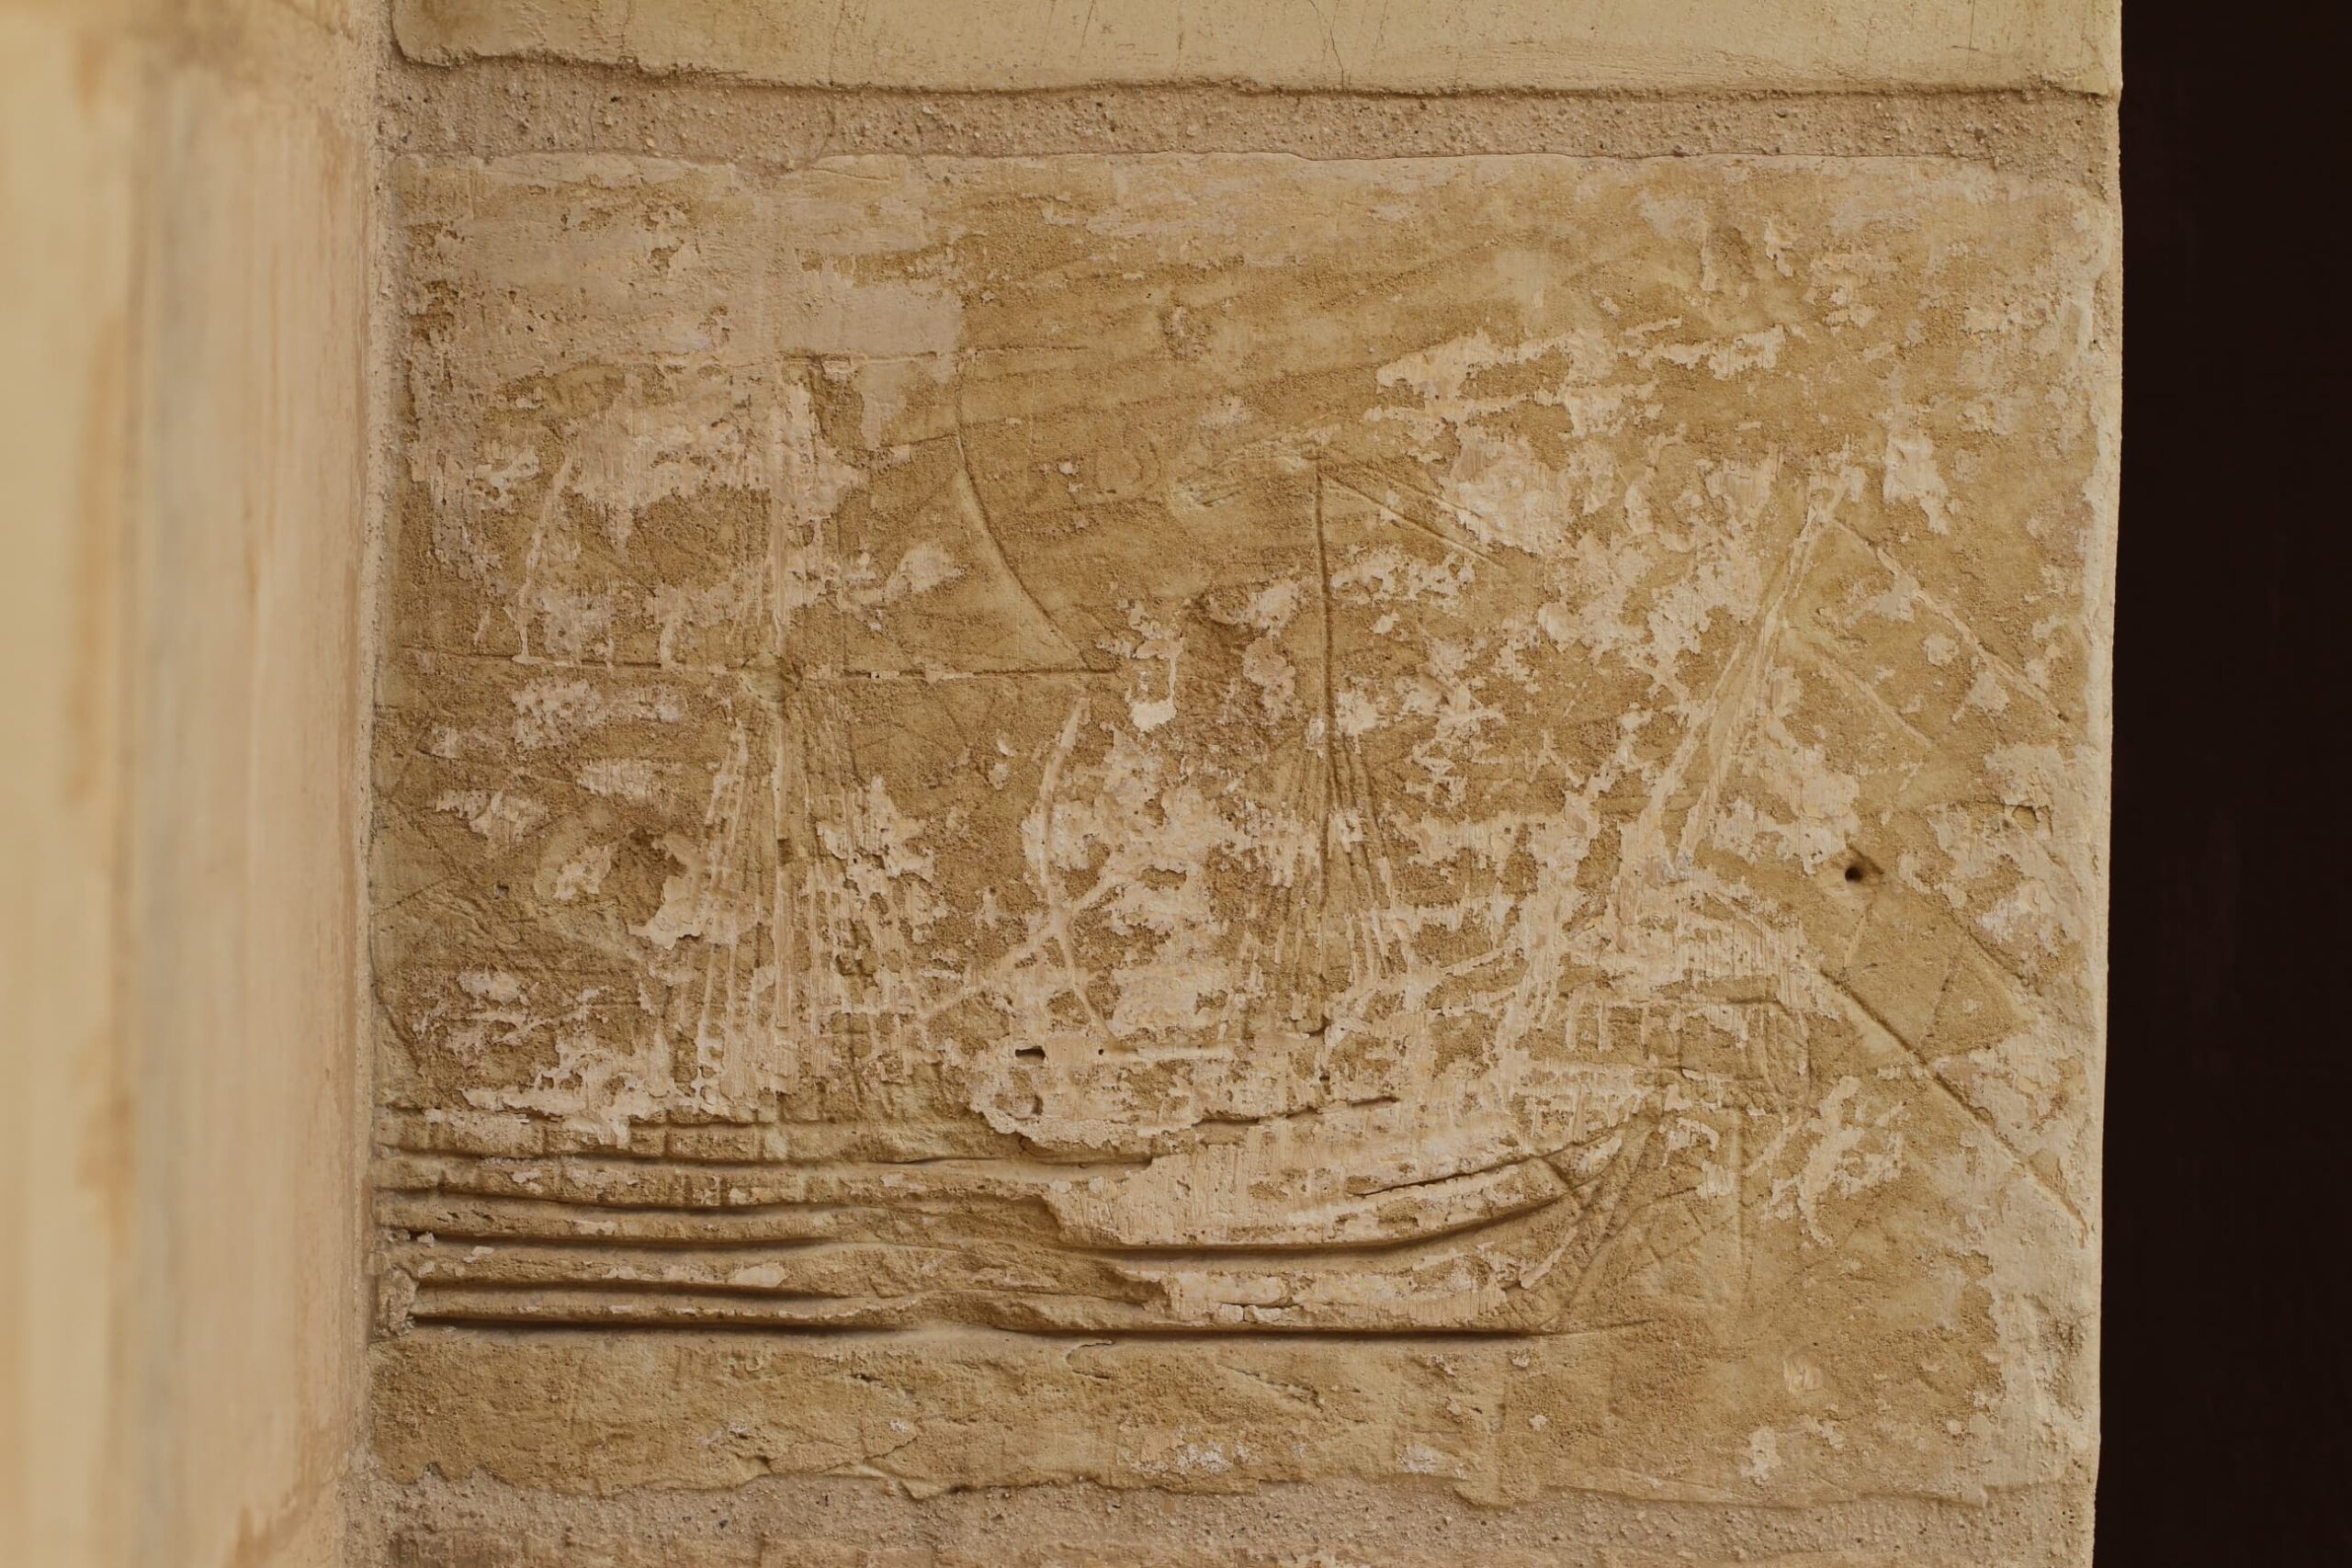 A deeply incised ship graffito bearing evidence of square rigging and flags. The typology of the ship is difficult to discern.